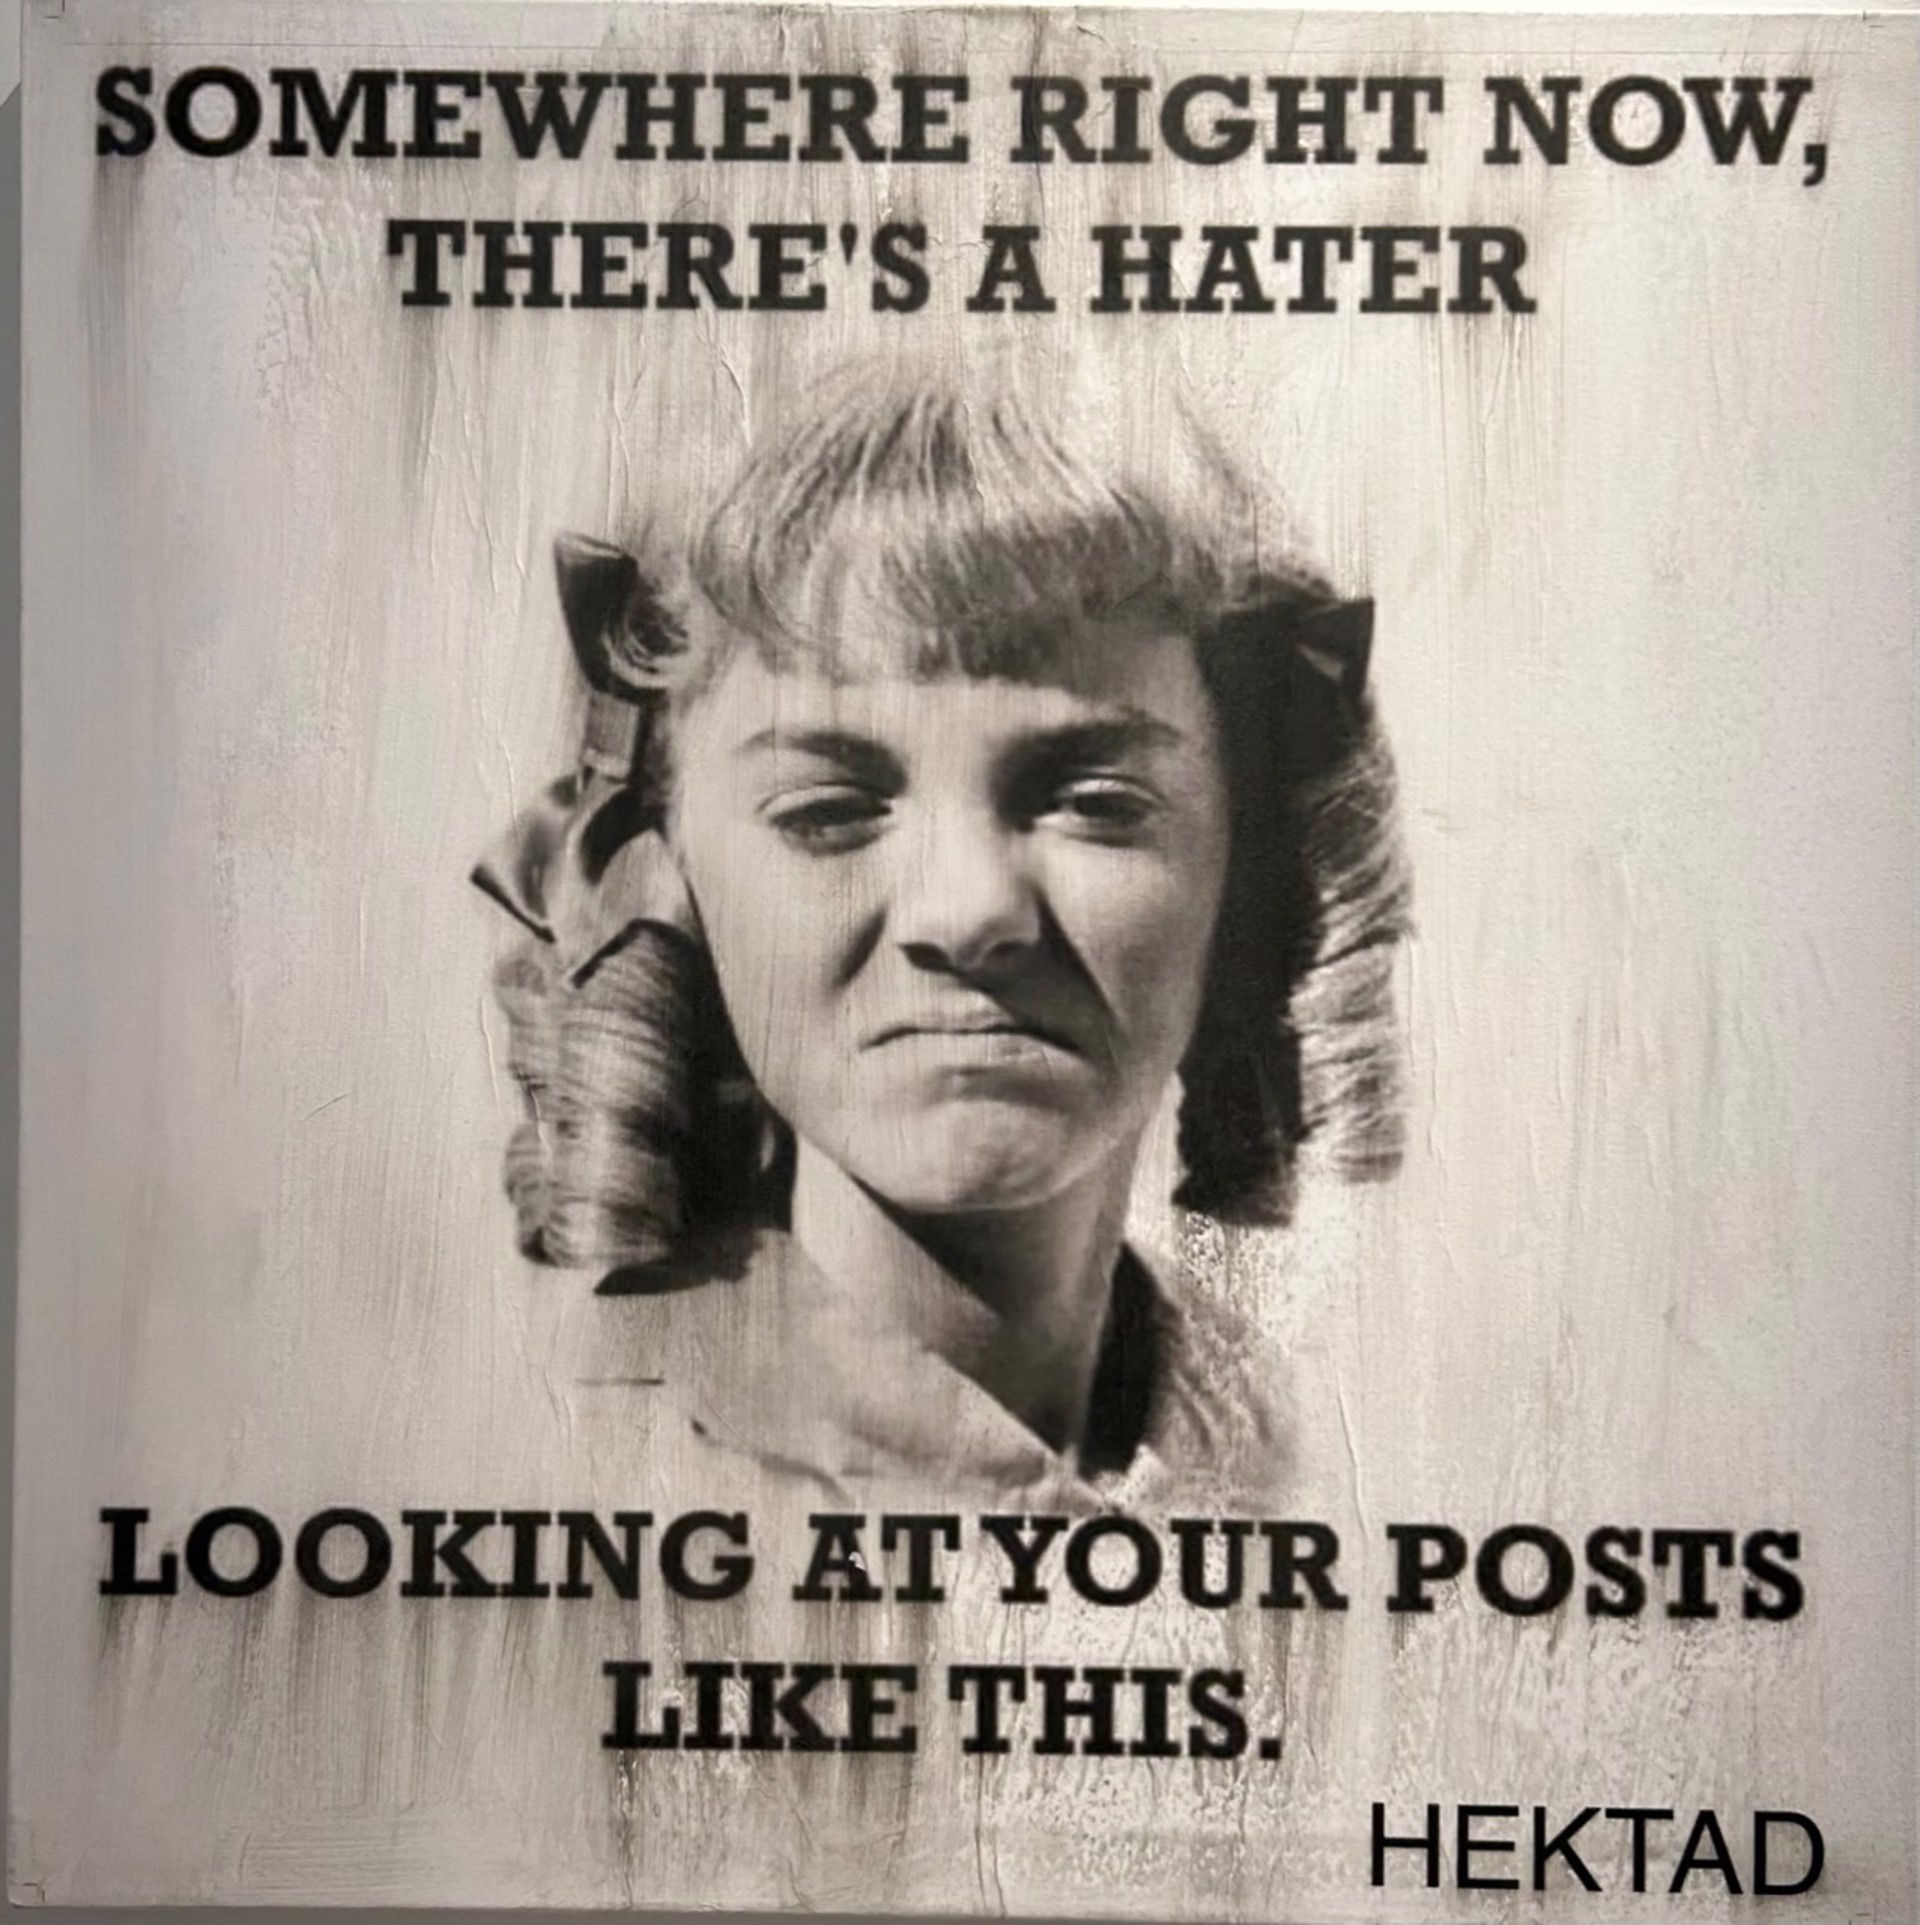 YOUR POSTS by HEKTAD